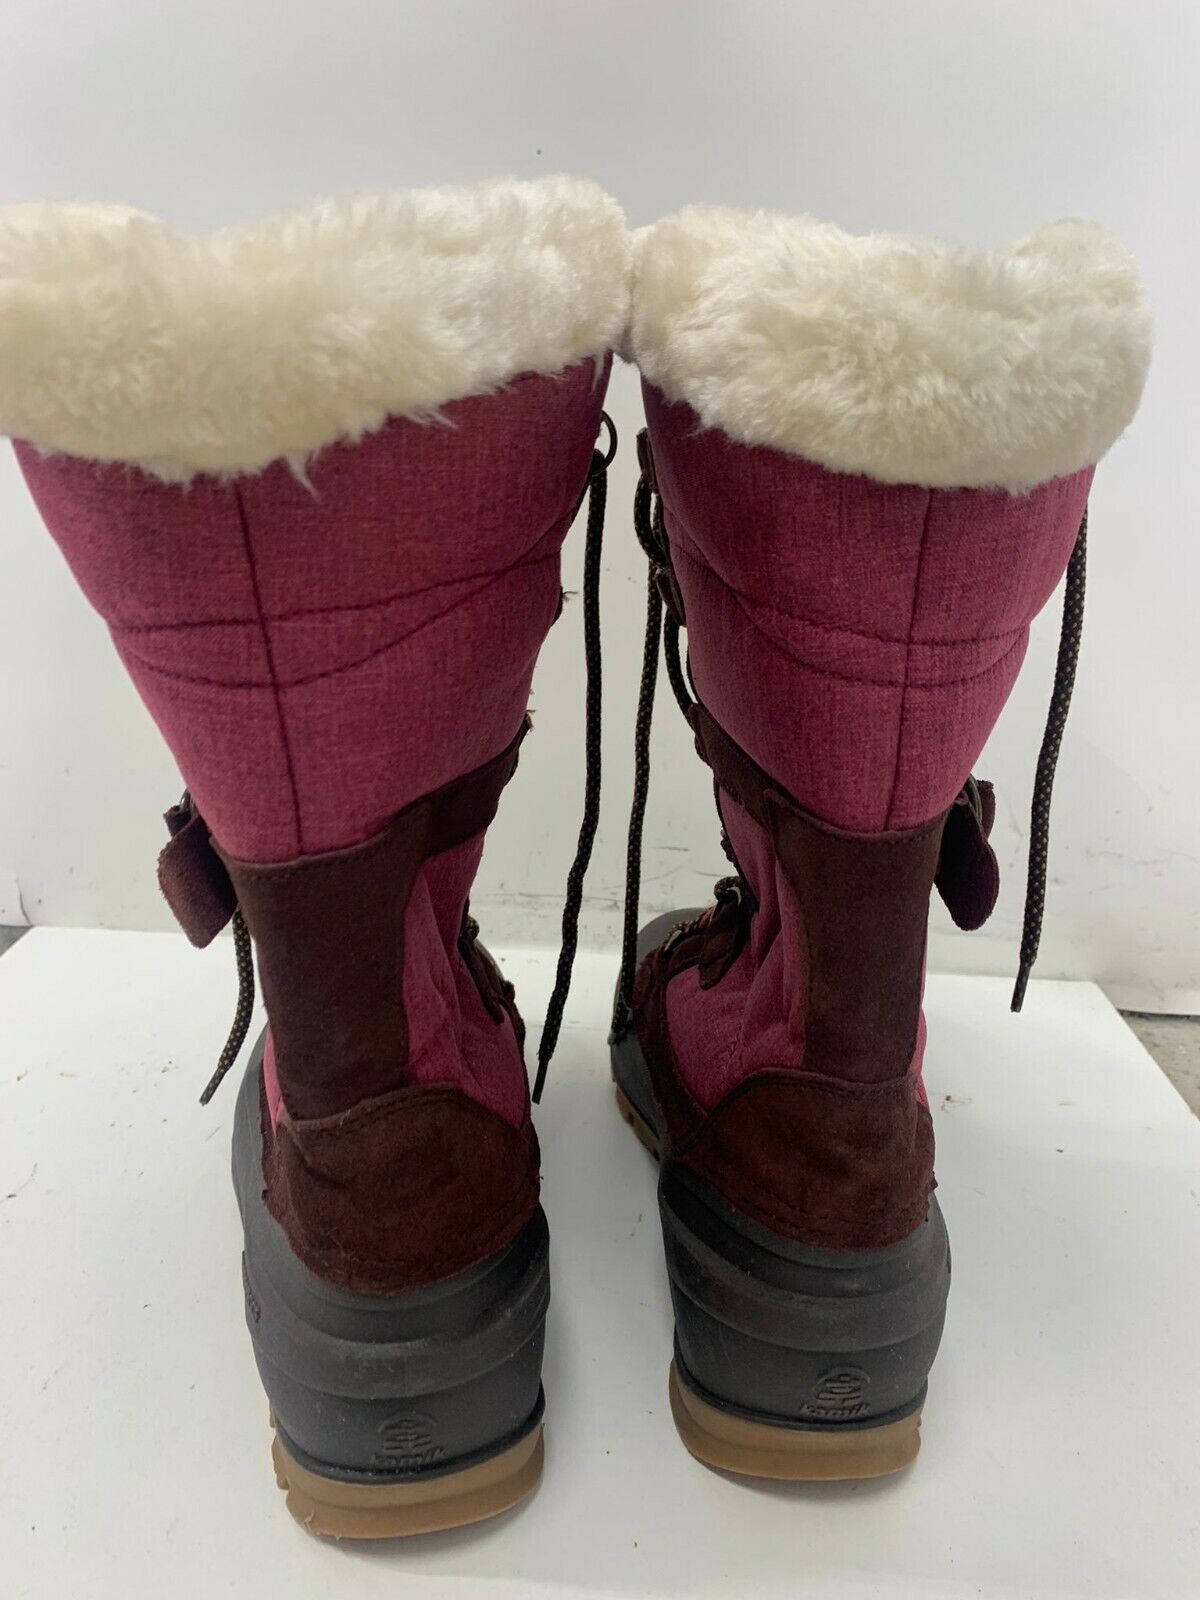 Kamik Womens 7 Snovalley 2 Boots Thinsulate Snow Faux Fur Burgundy Pink